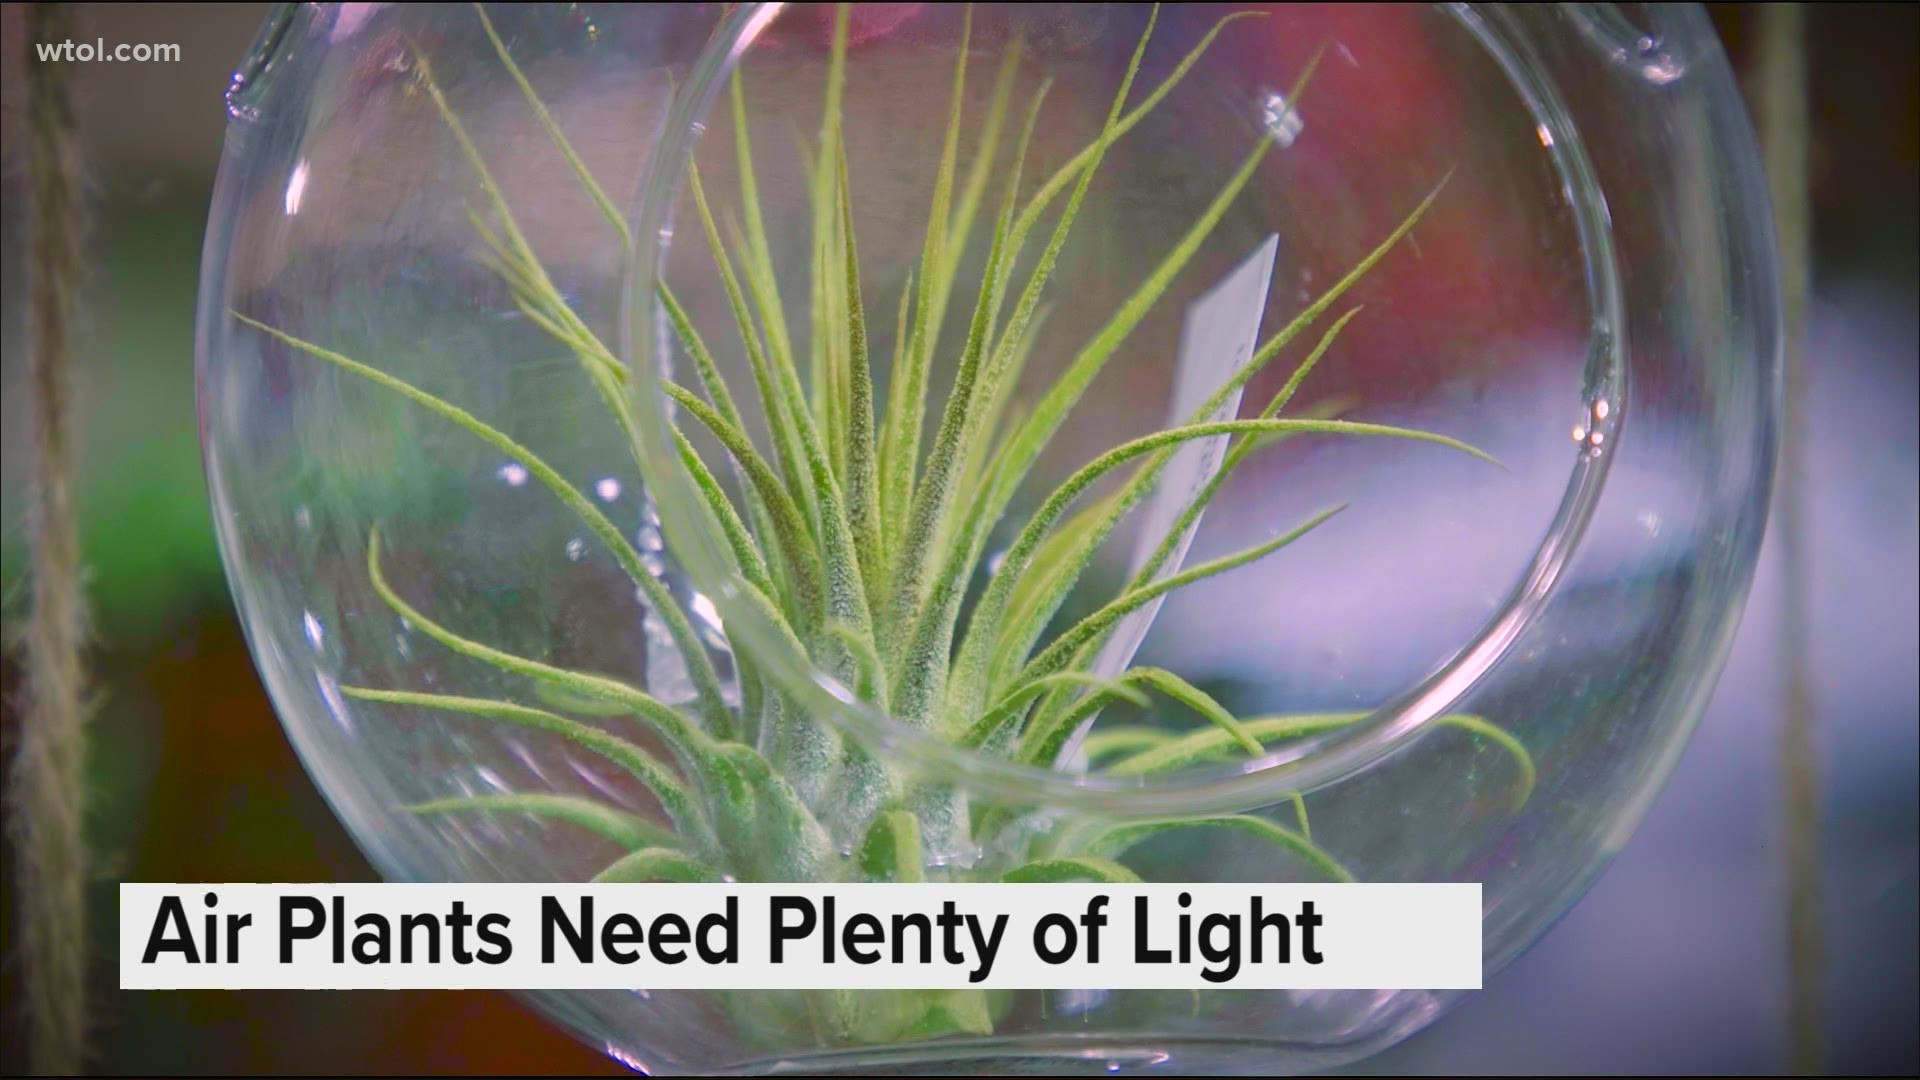 Don't have a green thumb, and you're looking for a no muss no fuss plant? Jenny from Nature's Corner is here to tell us all about air plants.